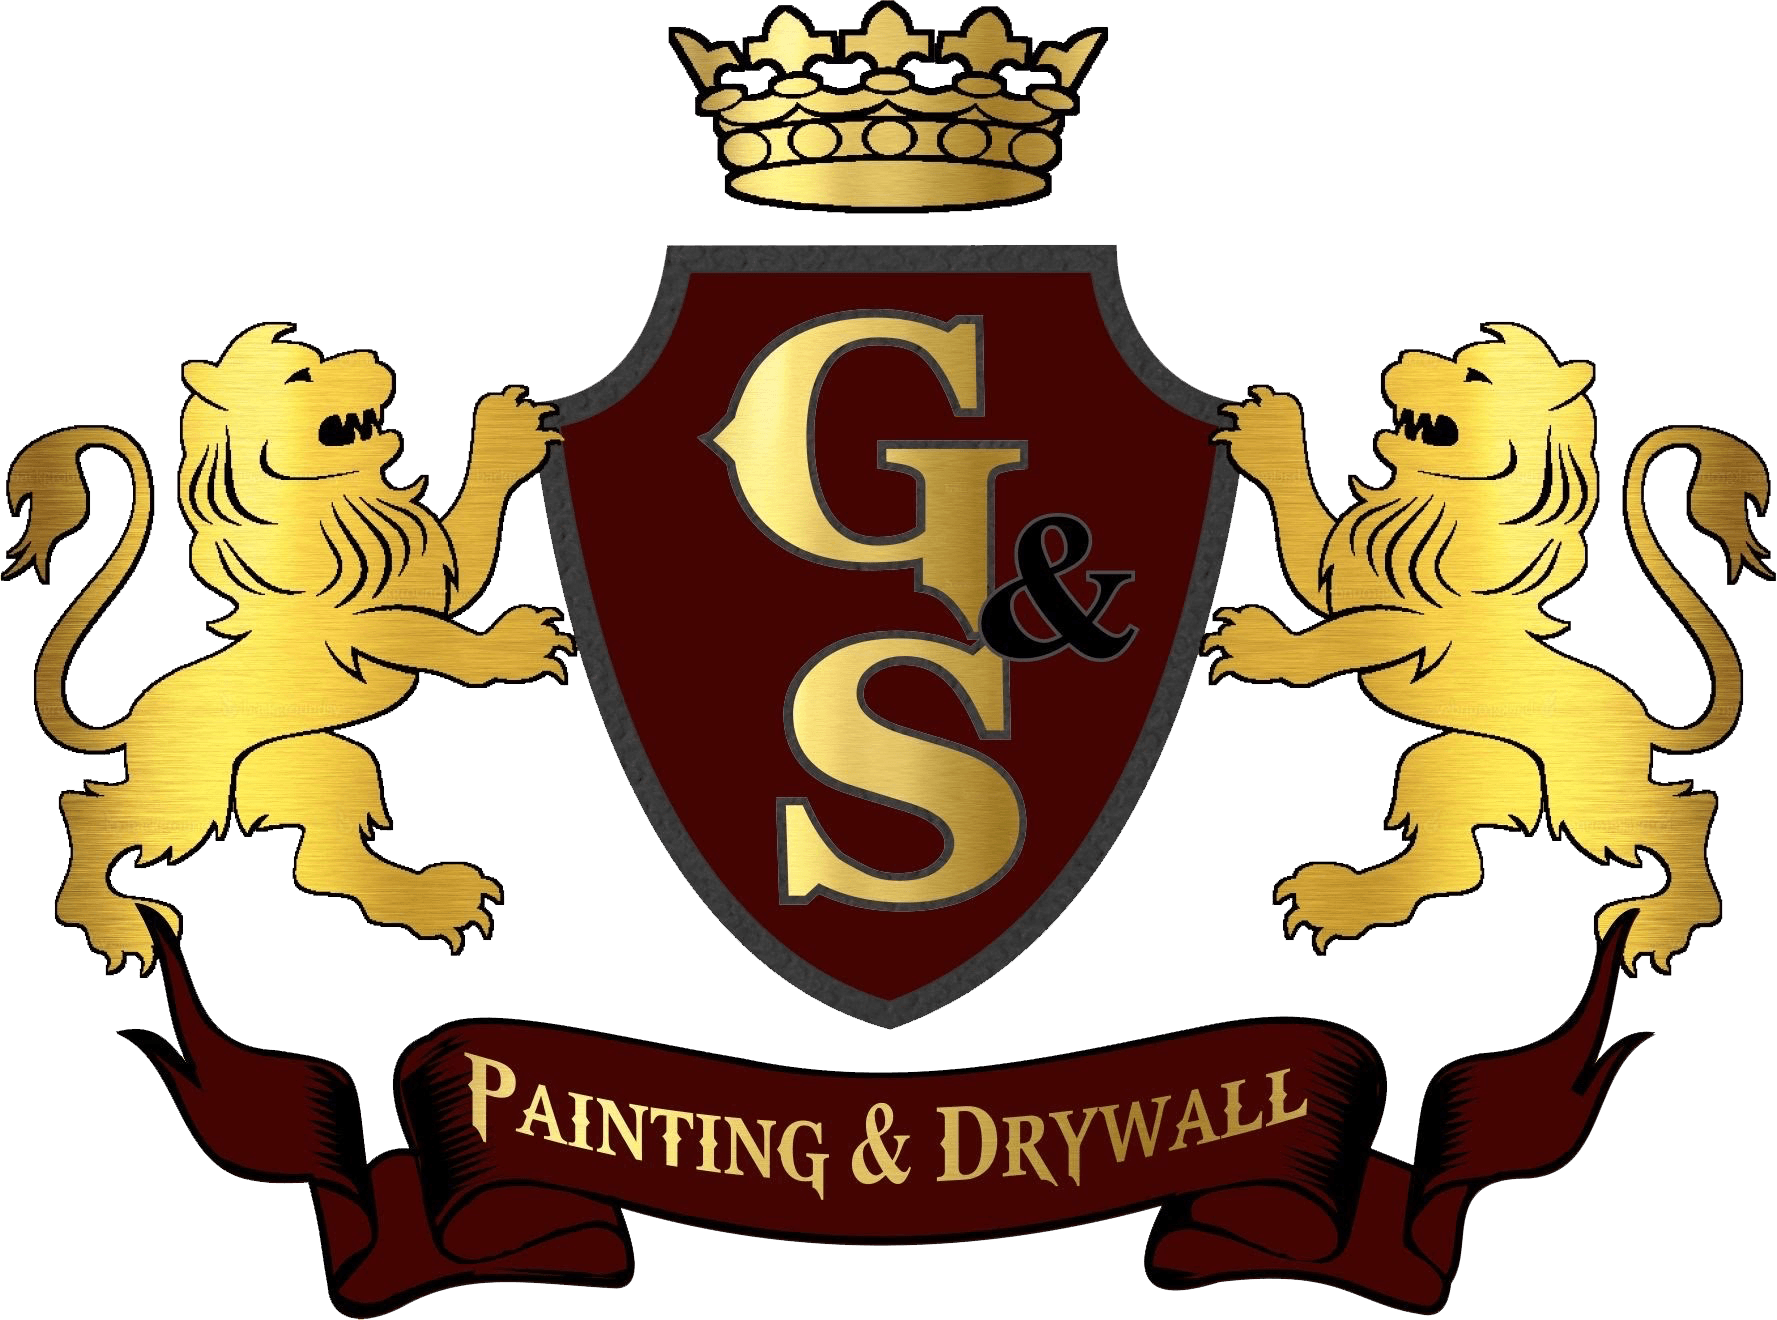 G&S Painting & Drywall